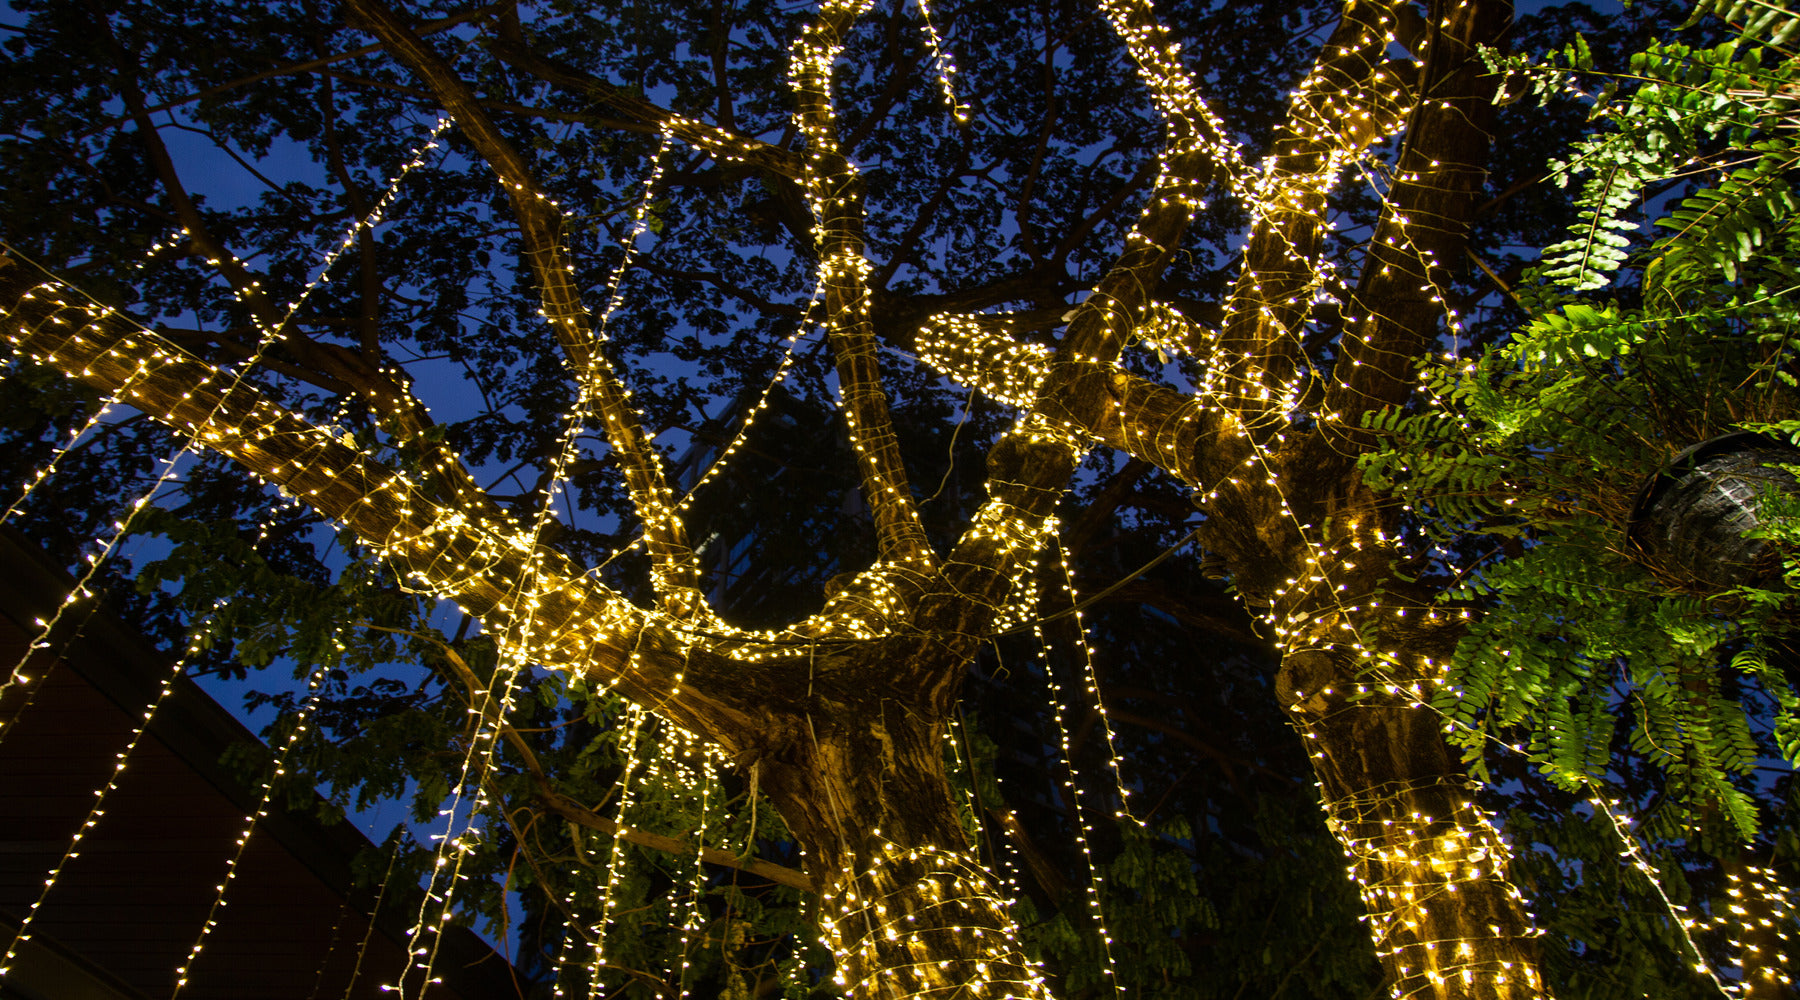 C9 LED bulbs used in cable of string lights on tree in the garden at night time